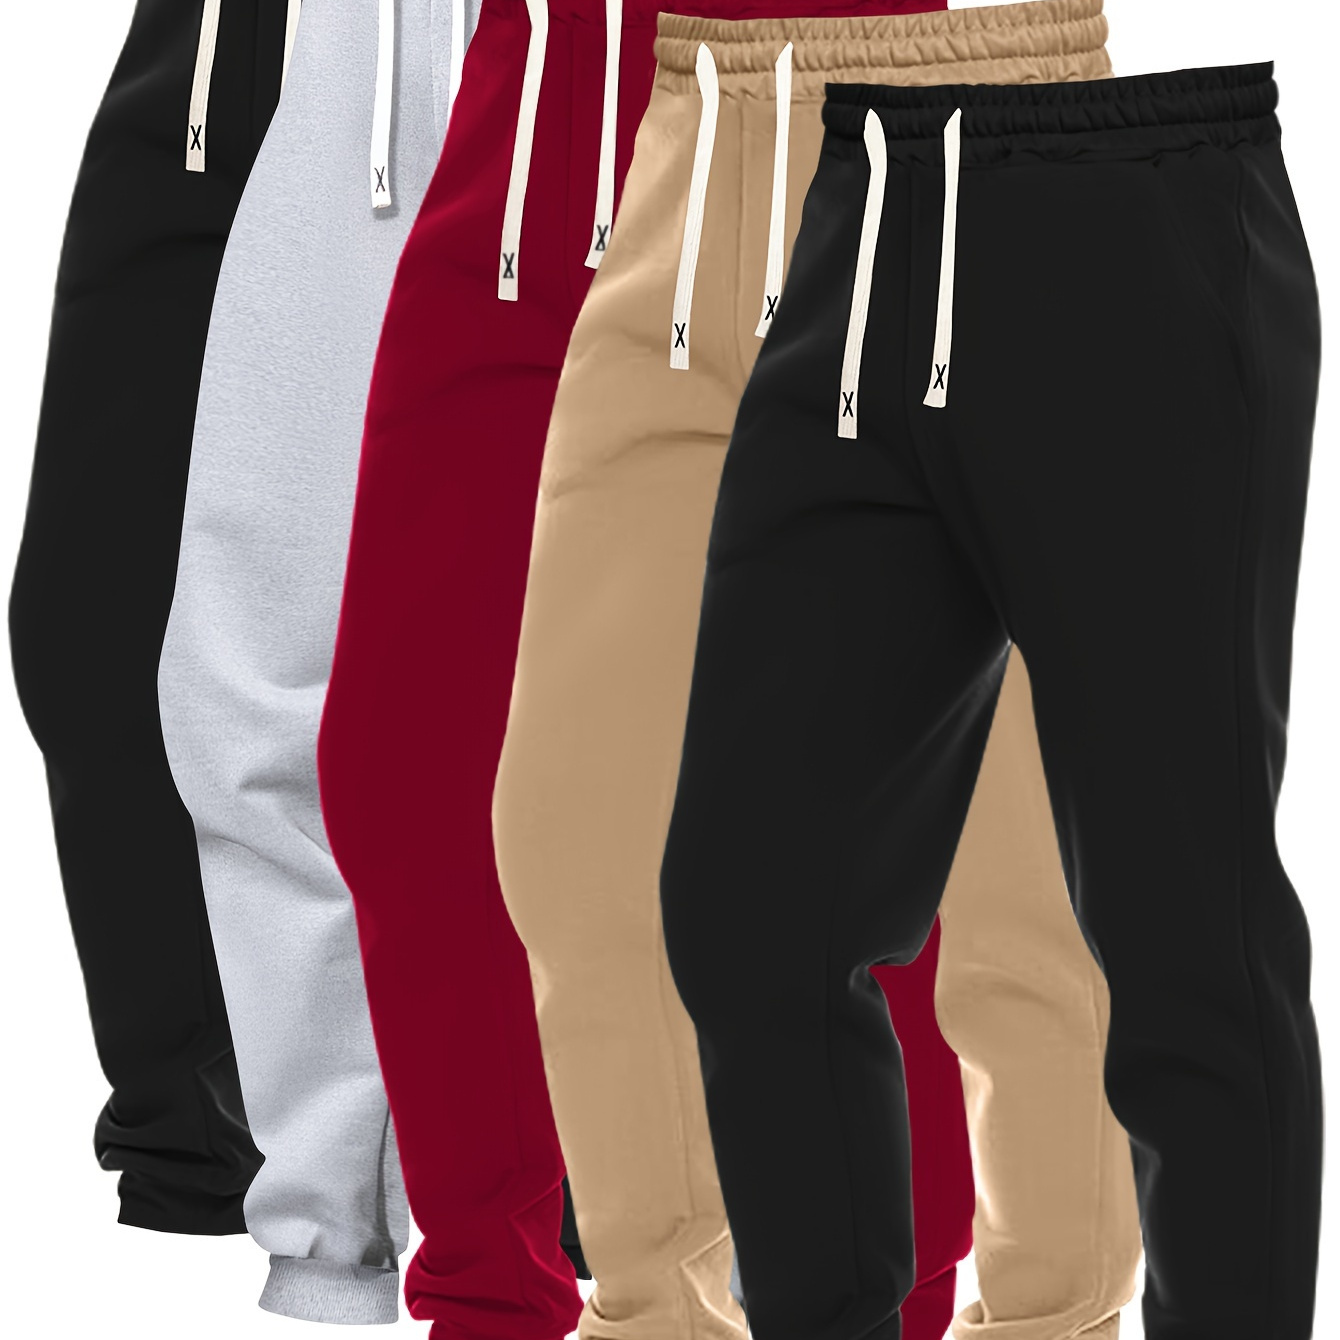 

5pcs Set Of Men's Solid Color Regular Fit And Cuffed Sweatpants With Drawstring And Pockets, Casual Trousers Suitable For Jogging And Outdoors Sports Wear